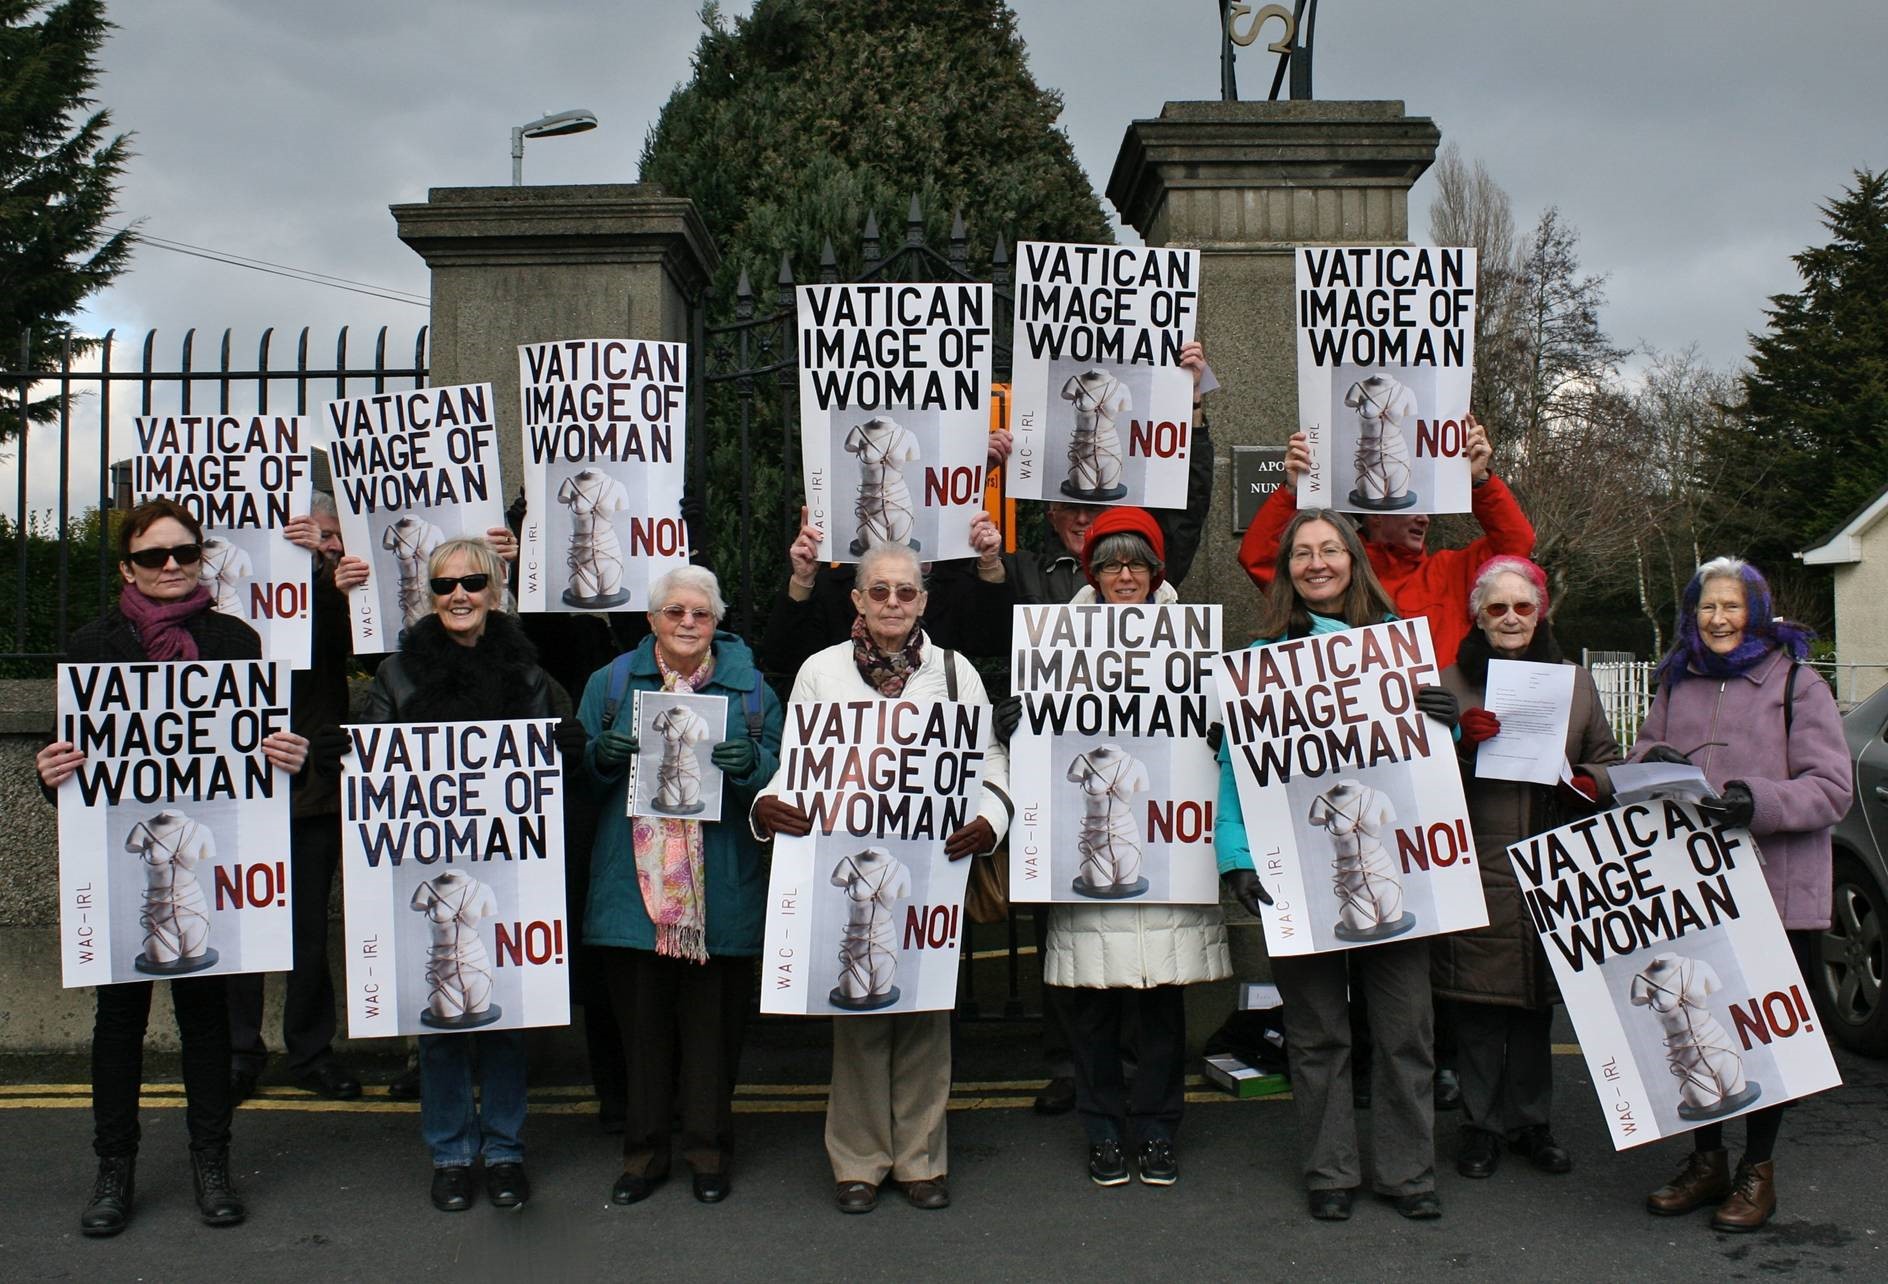 We Are Church Ireland protests about unacceptable image of women